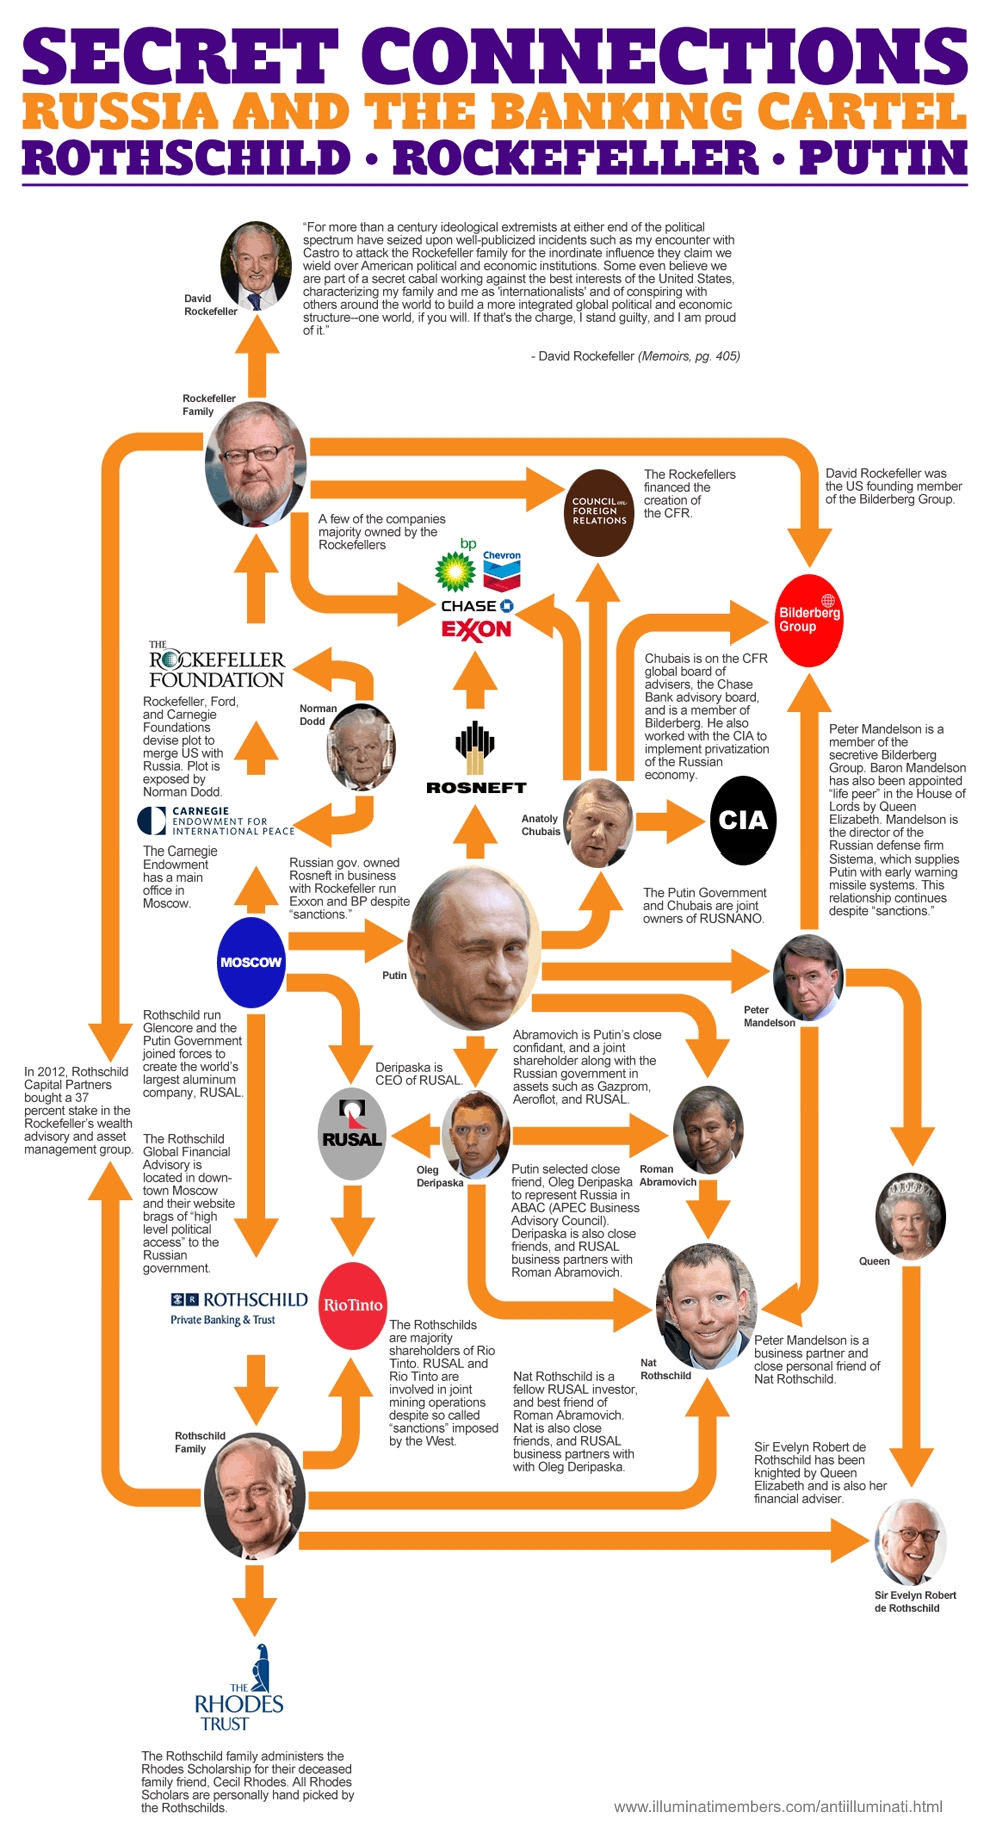 Rothchild Rockefeller Putin Secret Connections Russia and the Banking Cartel